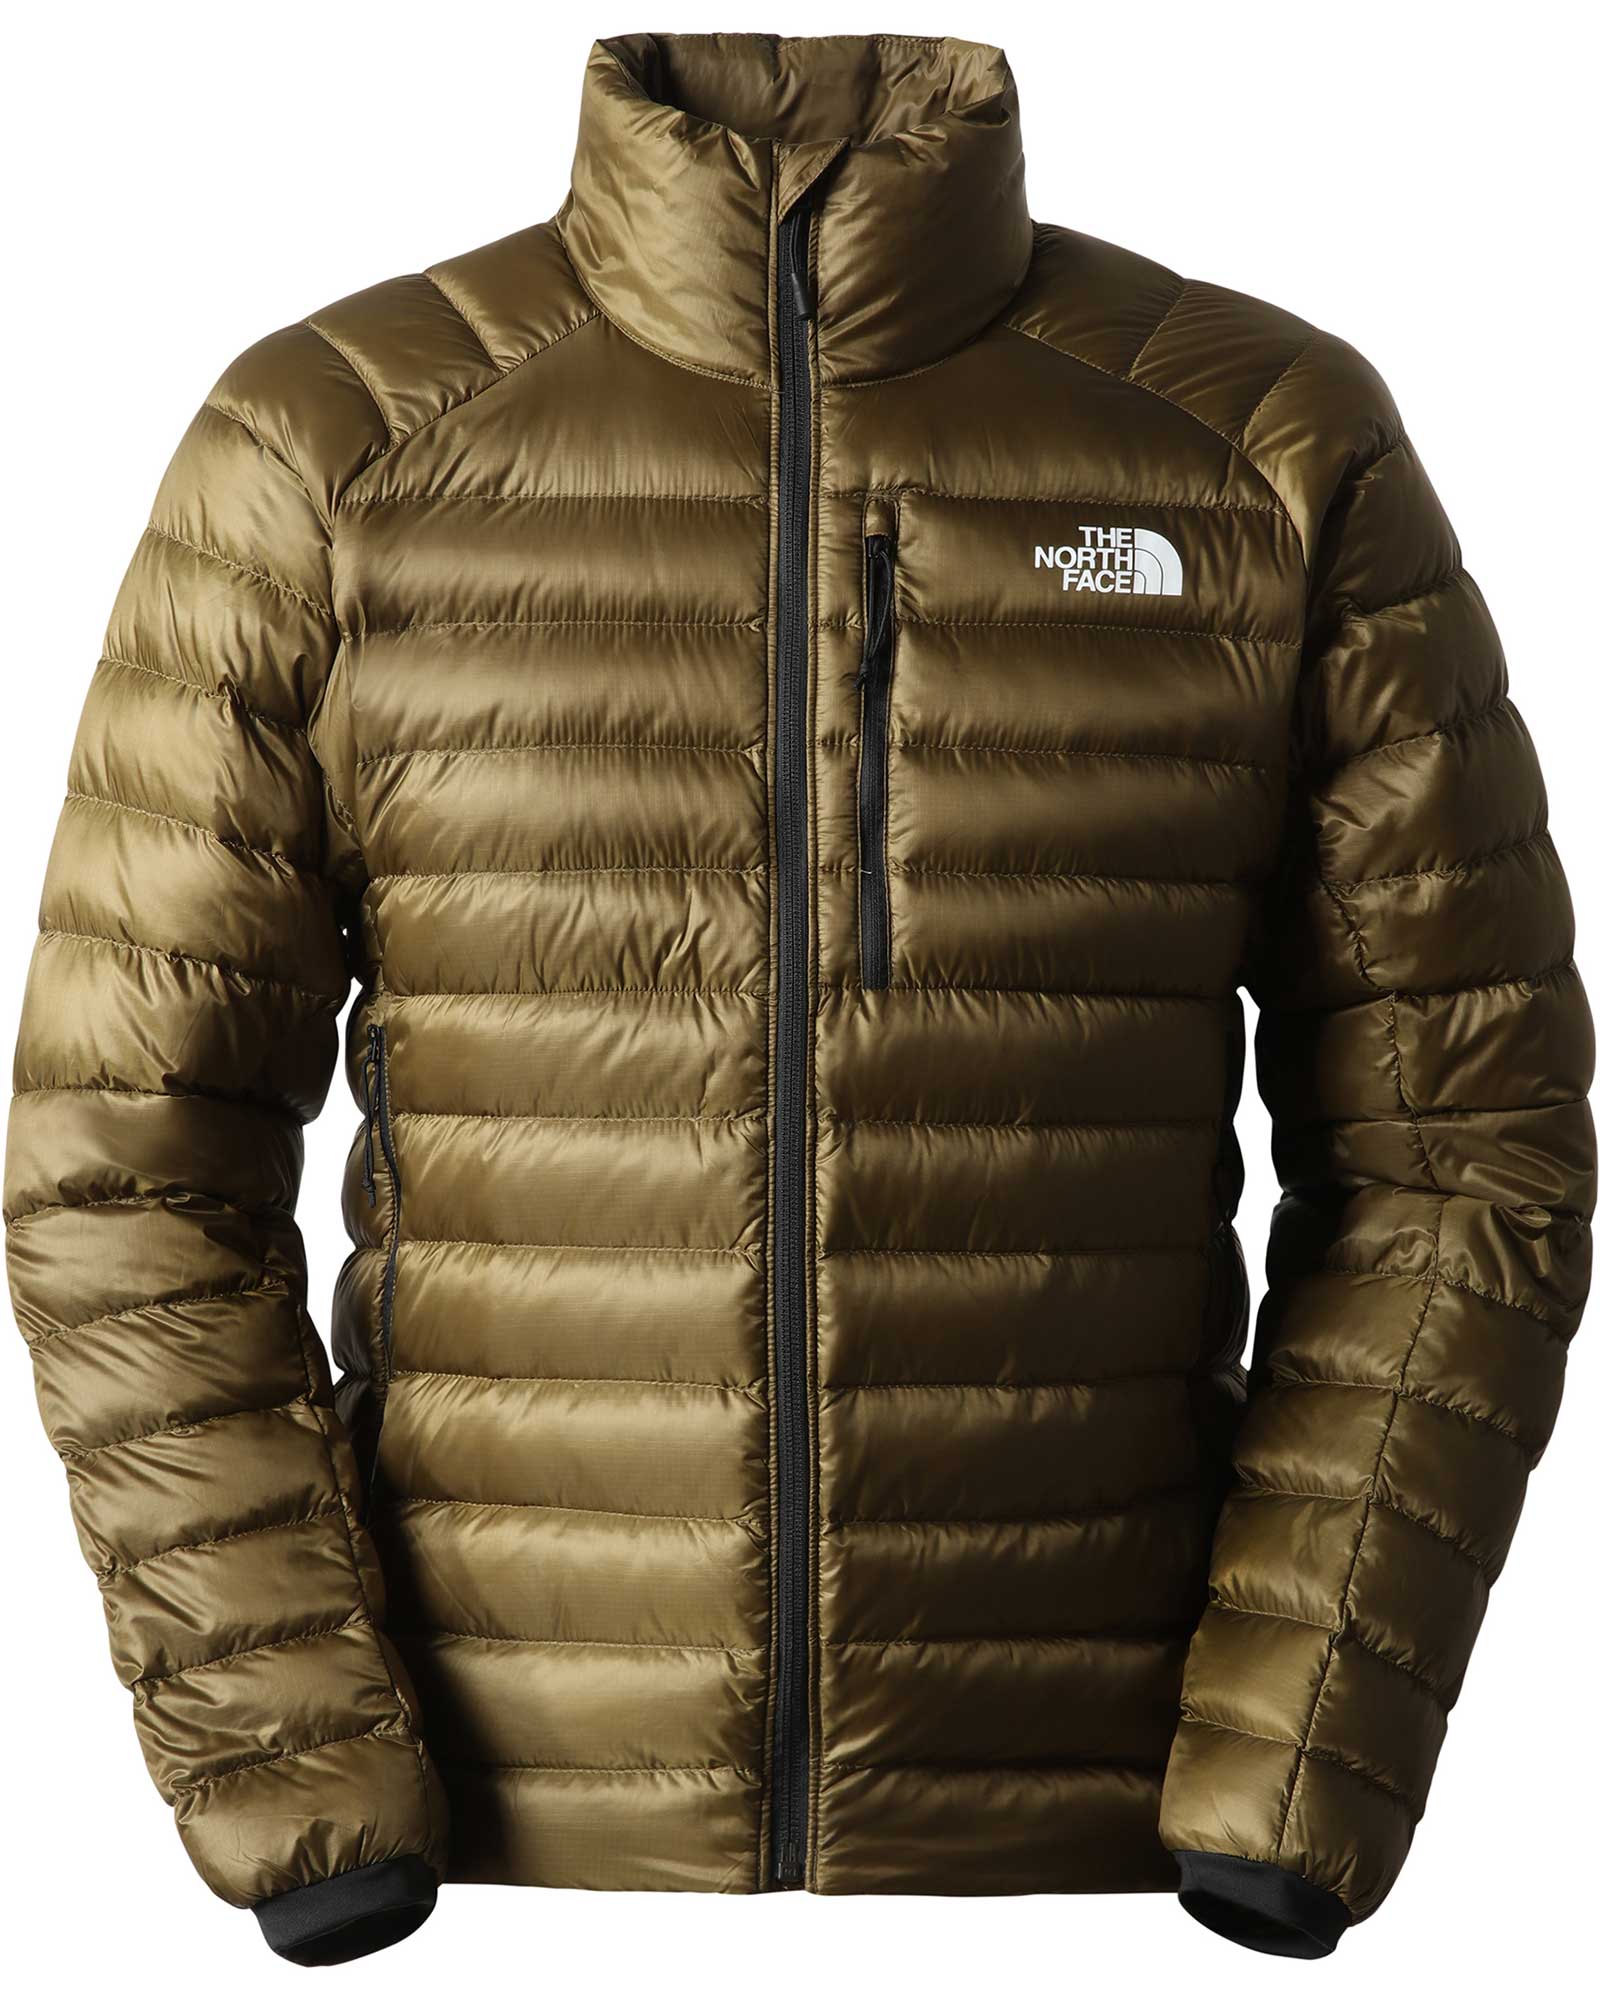 The North Face Summit Breithorn Men’s Down Jacket - Military Olive S